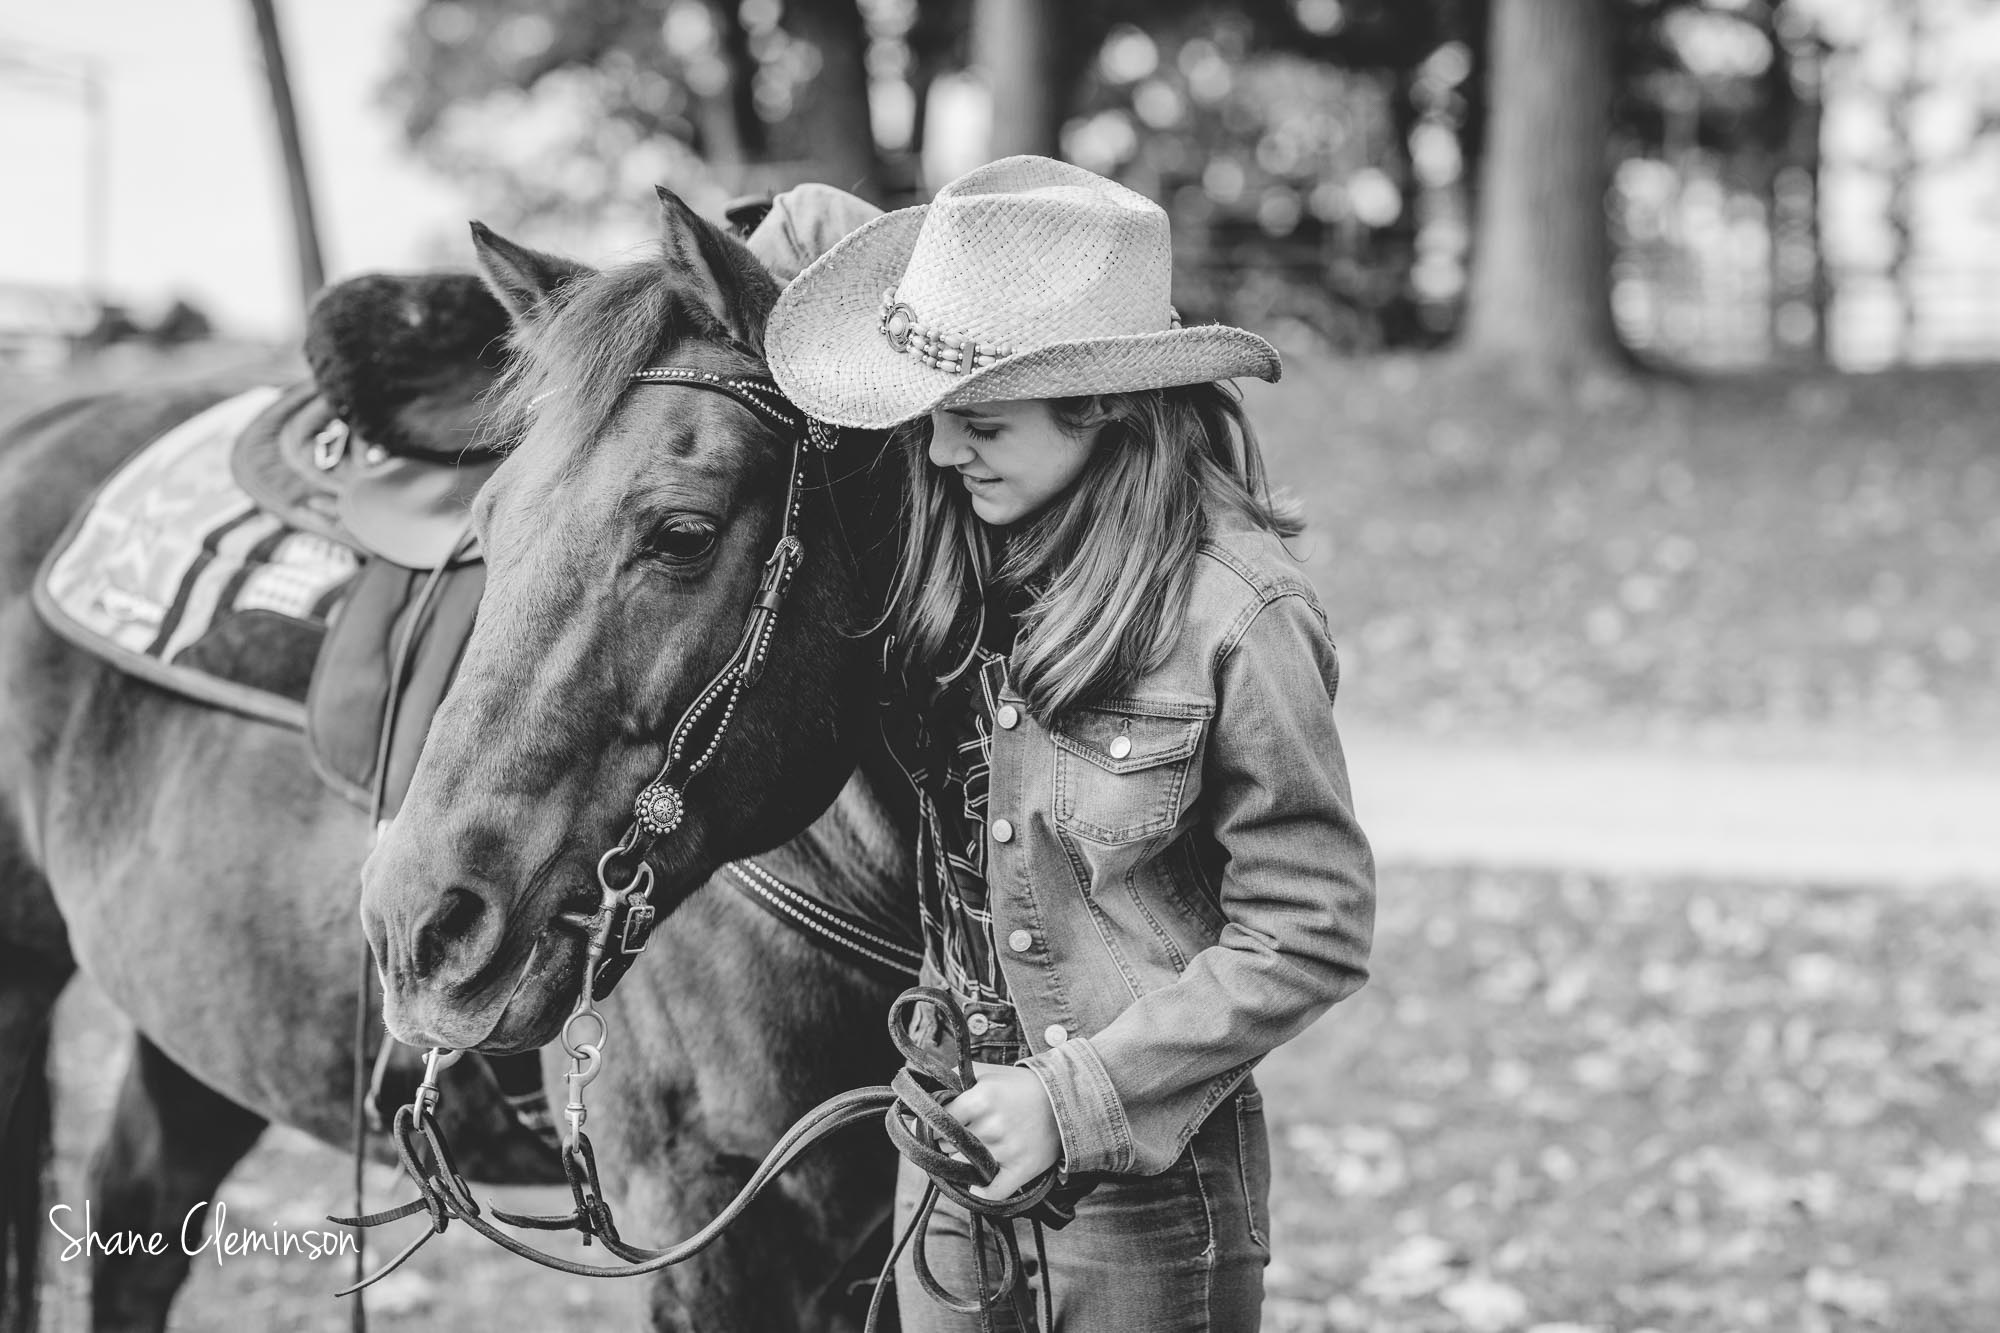 A Girl and Her Horse Portrait Photographer Shane Cleminson Indiana, Illinois, Wisconsin and Michigan